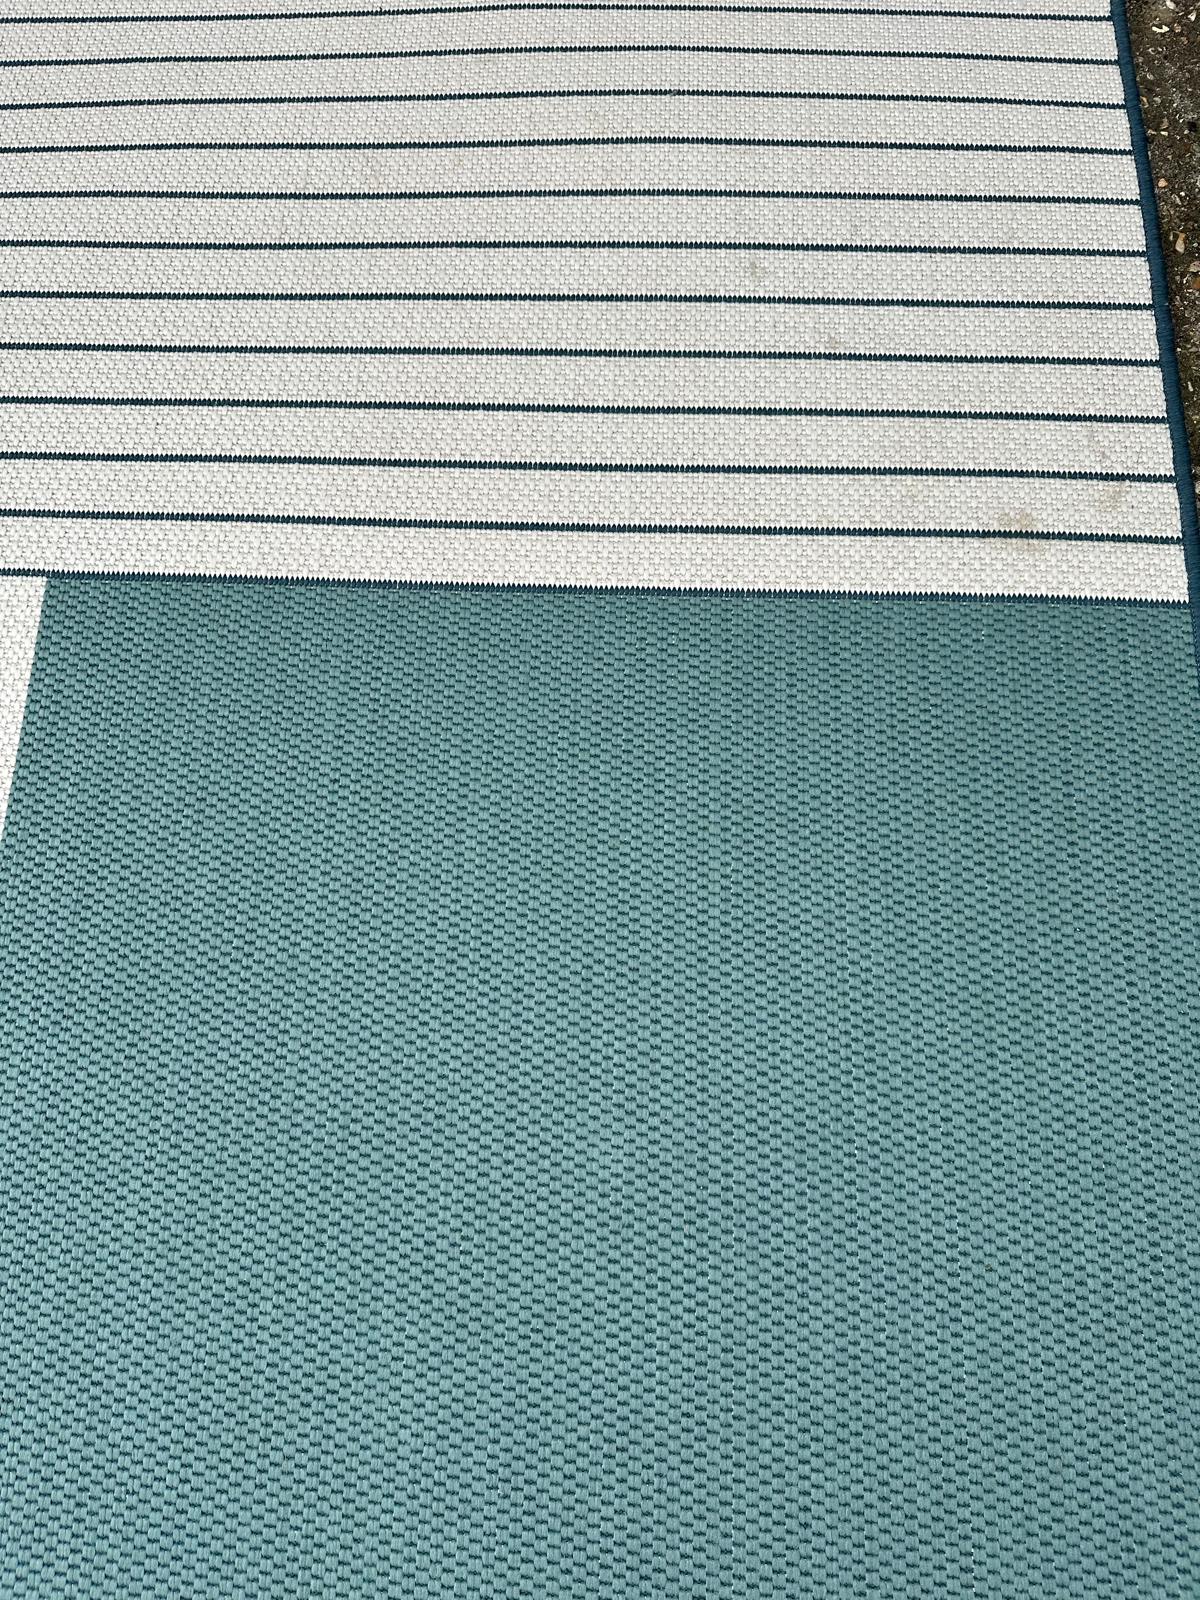 A contemporary rug in blue, green and beige 200cm x 250cm - Image 2 of 5